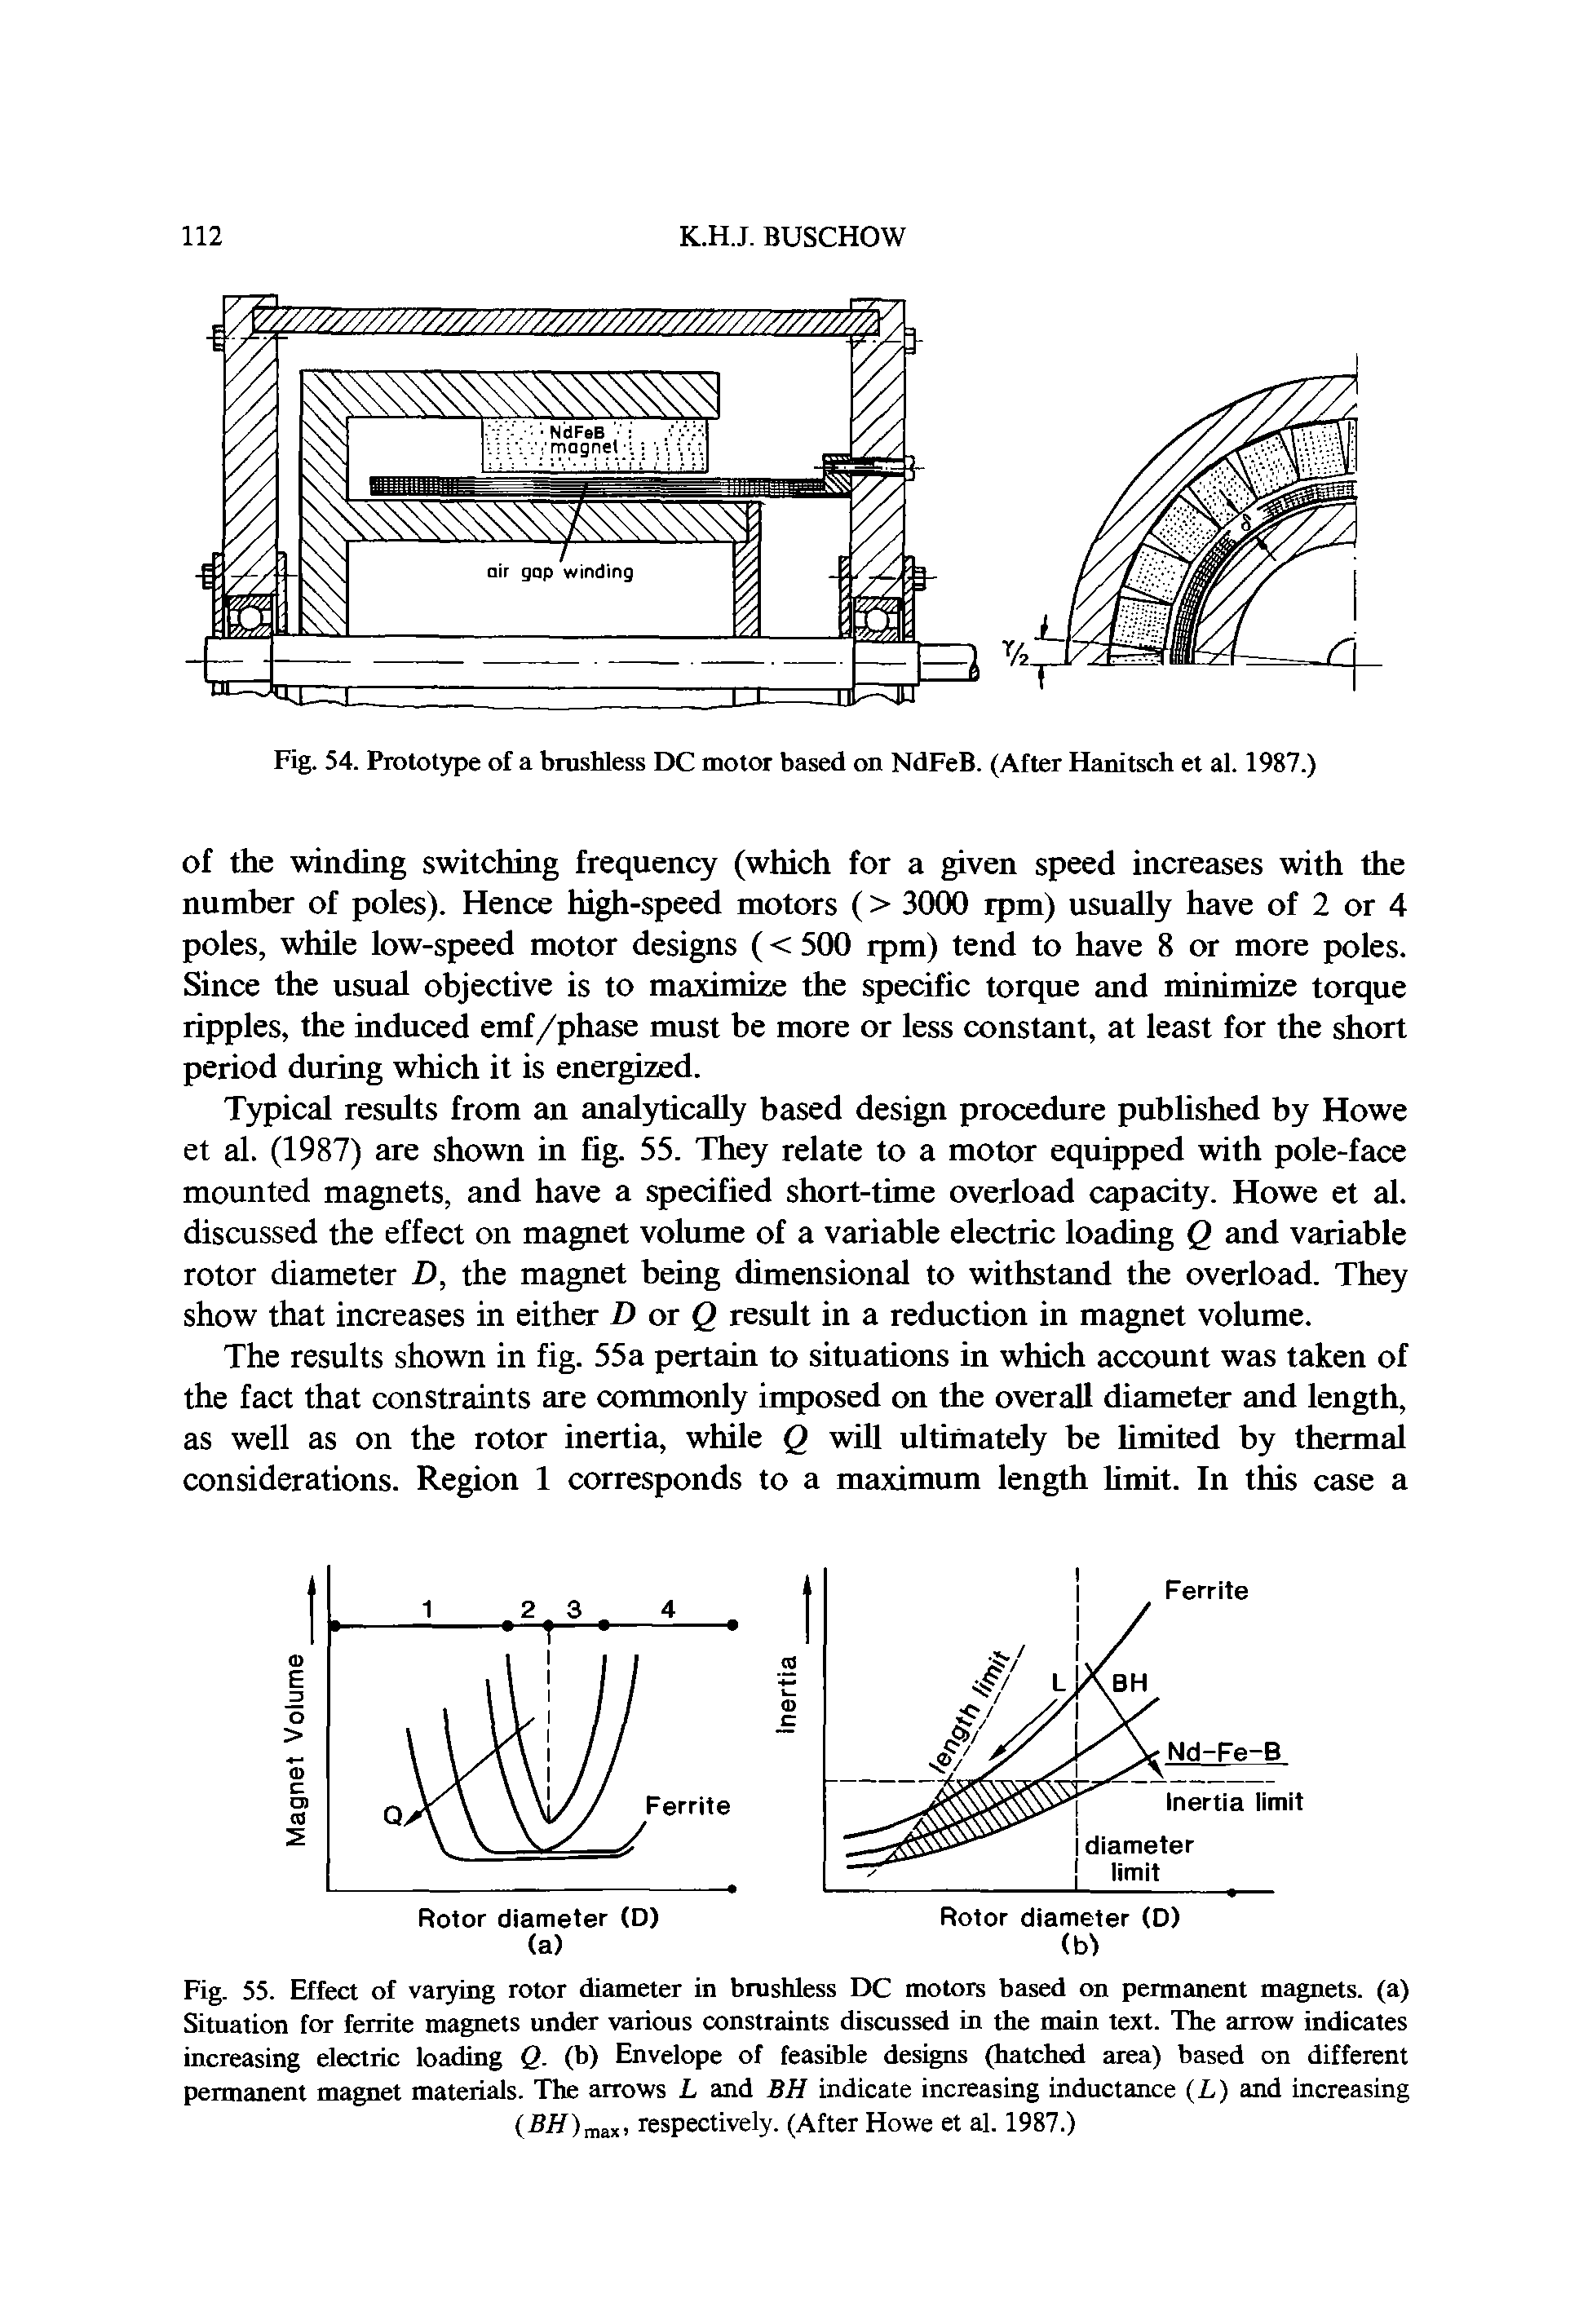 Fig. 55. Effect of varying rotor diameter in brushless DC motors based on permanent magnets, (a) Situation for ferrite magnets under various constraints discussed in the main text. The arrow indicates increasing electric loading Q. (b) Envelope of feasible designs (hatched area) based on different permanent magnet materials. The arrows L and BH indicate increasing inductance (L) and increasing (BH)msi%, respectively. (After Howe et al. 1987.)...